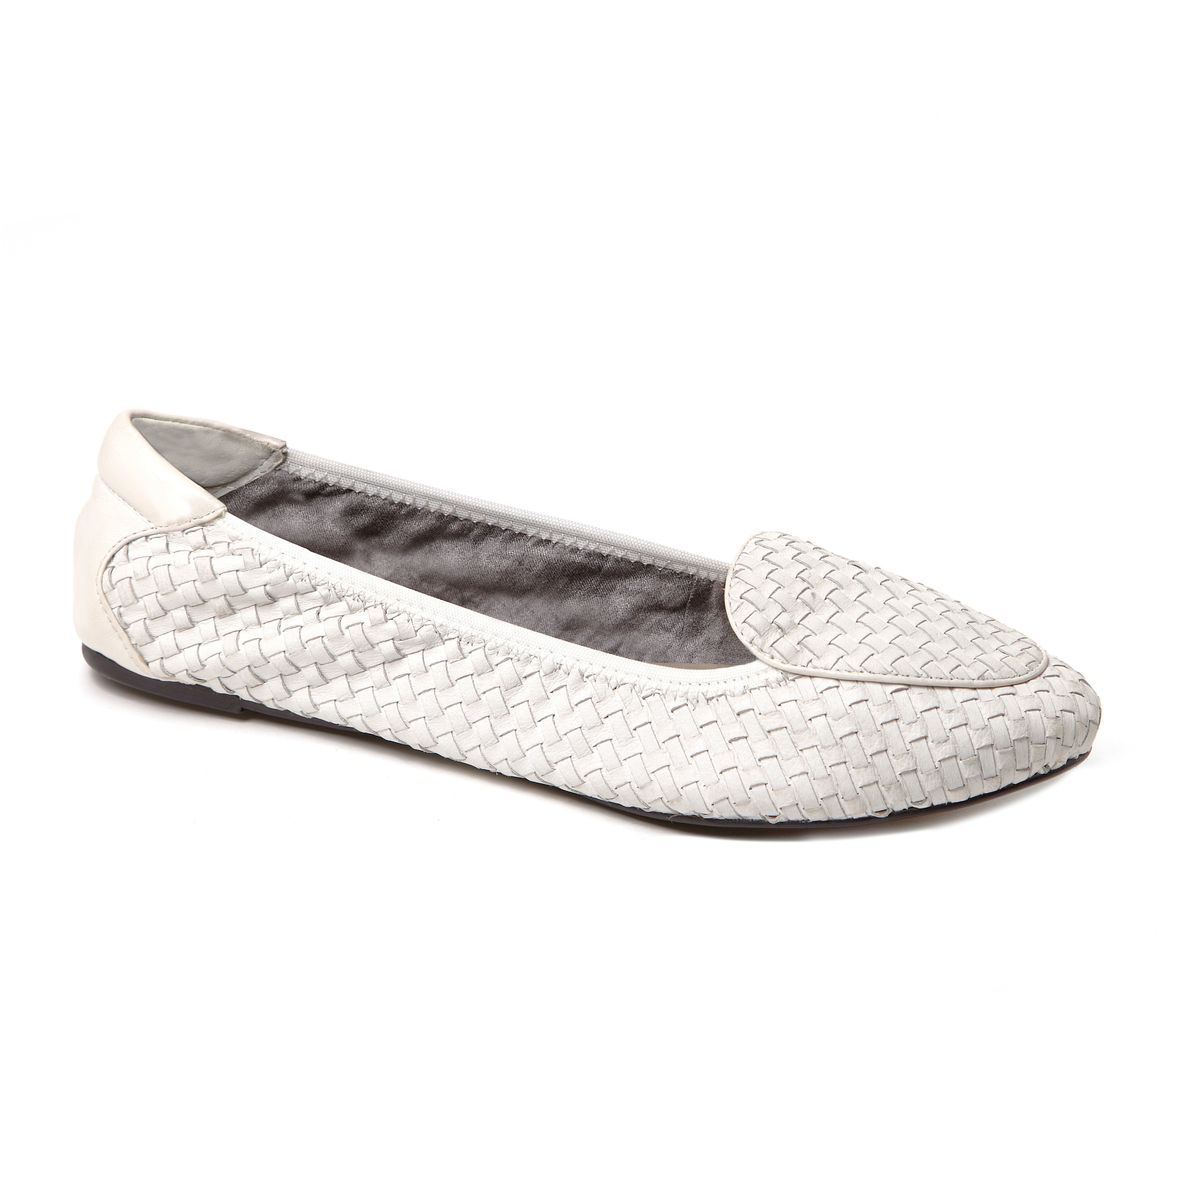 White woven leather loafers from Cocorose London